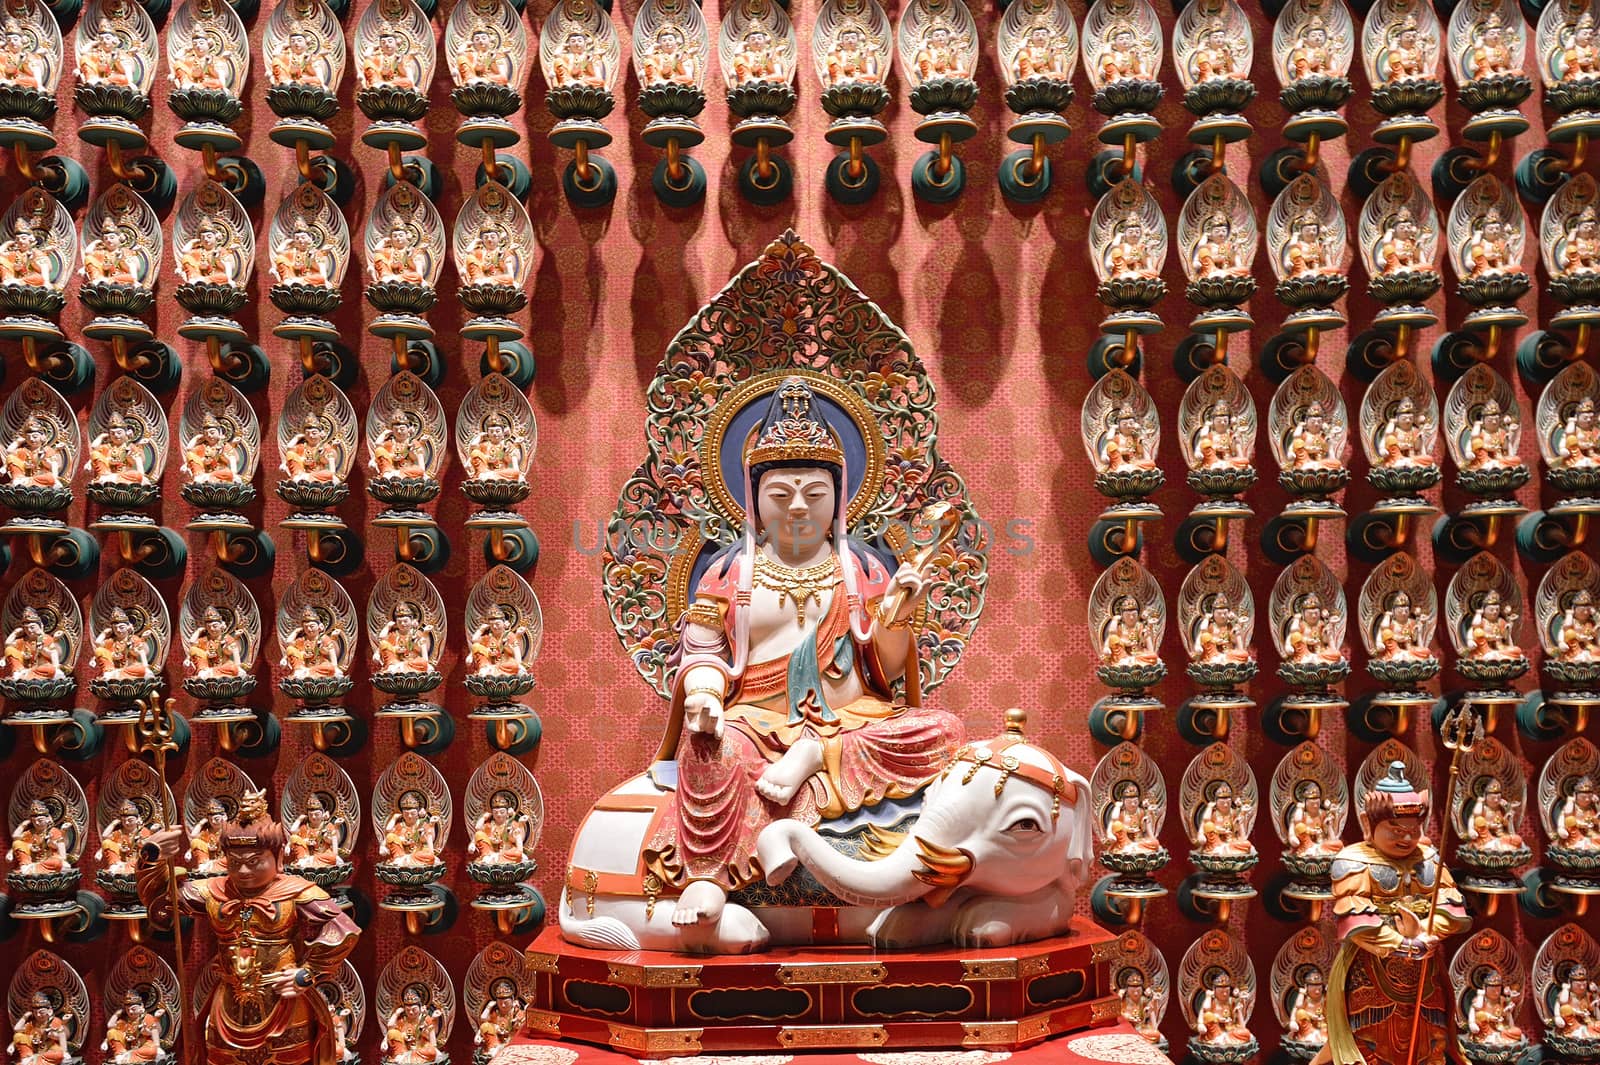 The statue of Buddha in Chinese Buddha Tooth Relic Temple in Singapore